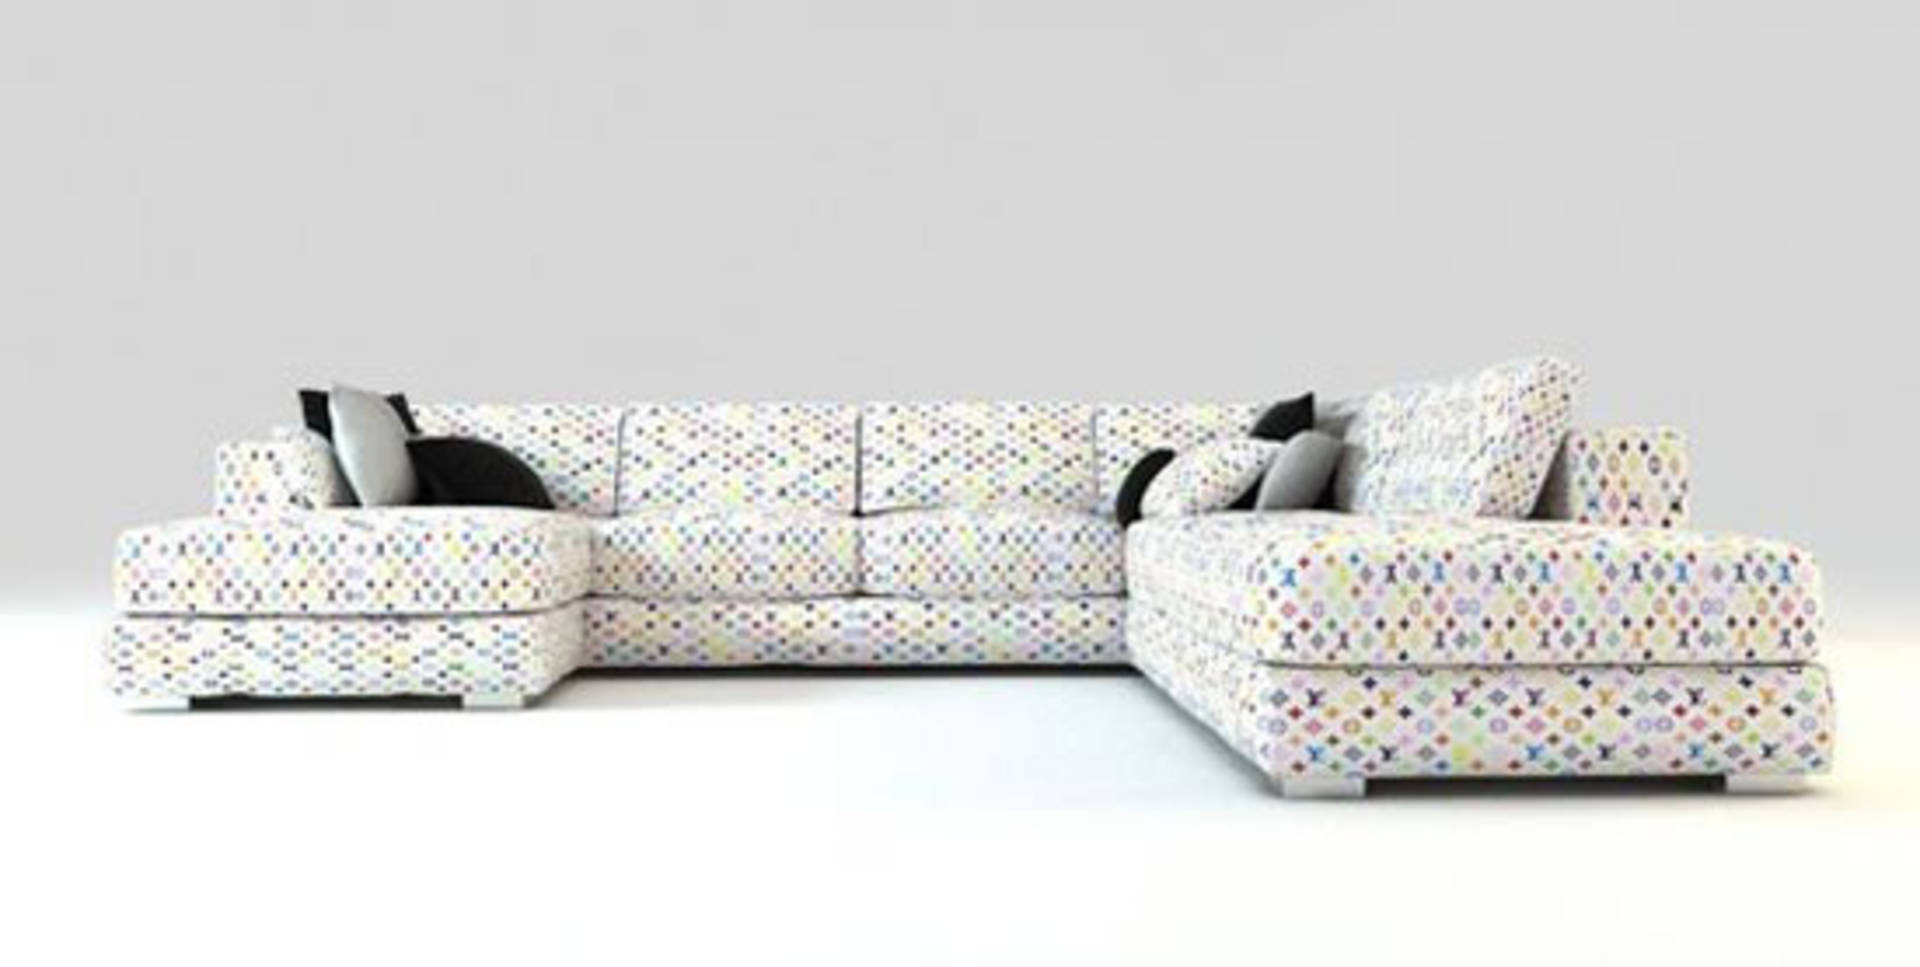 Luxury and Glamour Louis Vuitton Sofas by Jason Phillips, Home Reviews